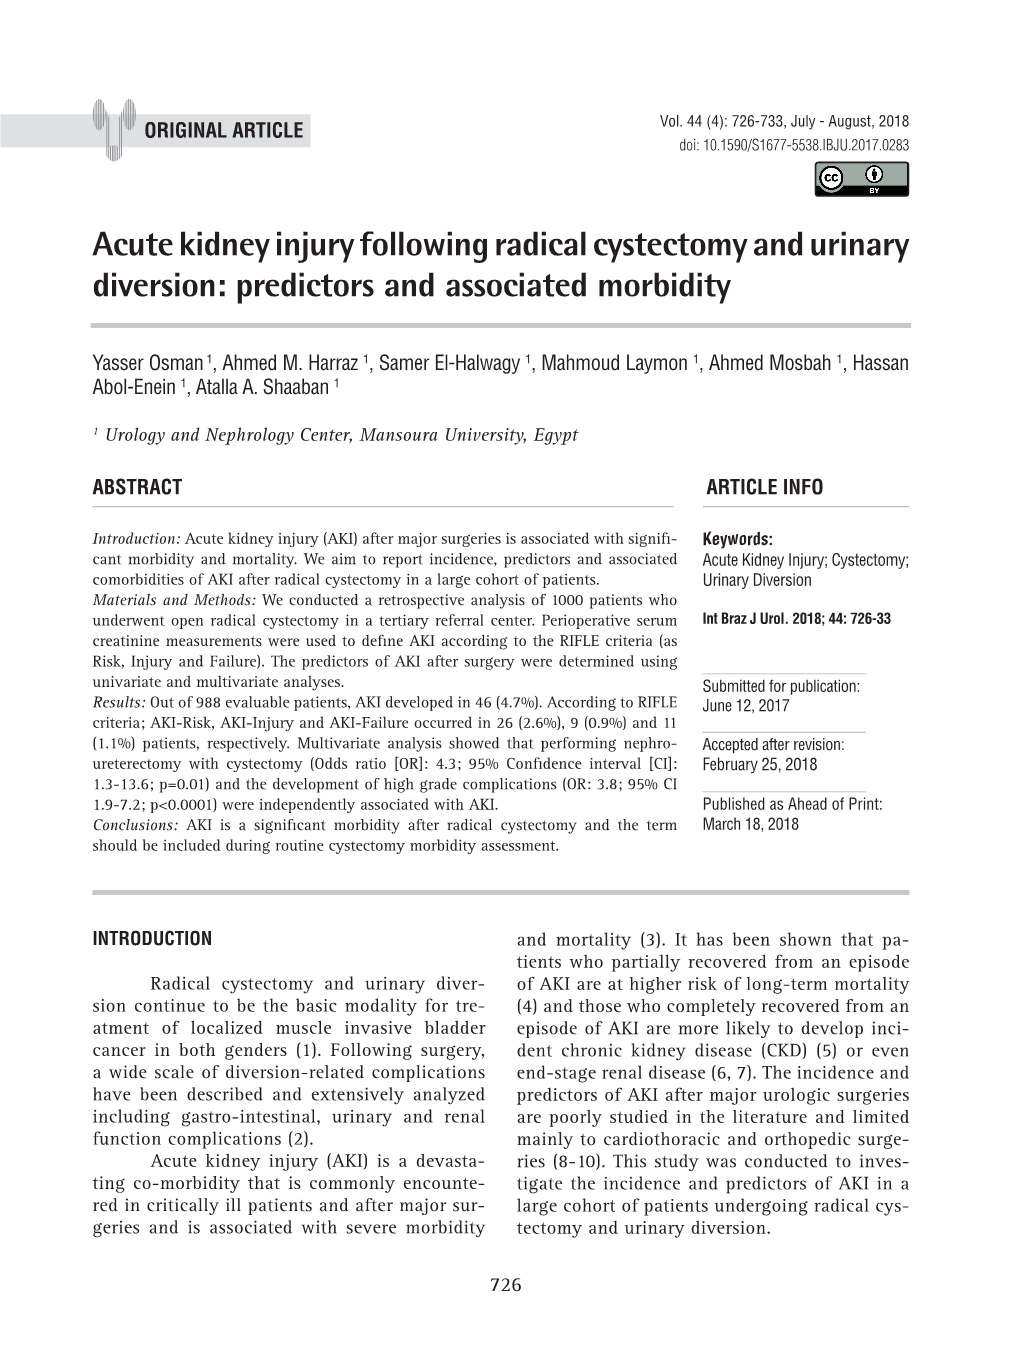 Acute Kidney Injury Following Radical Cystectomy and Urinary Diversion: Predictors and Associated Morbidity ______